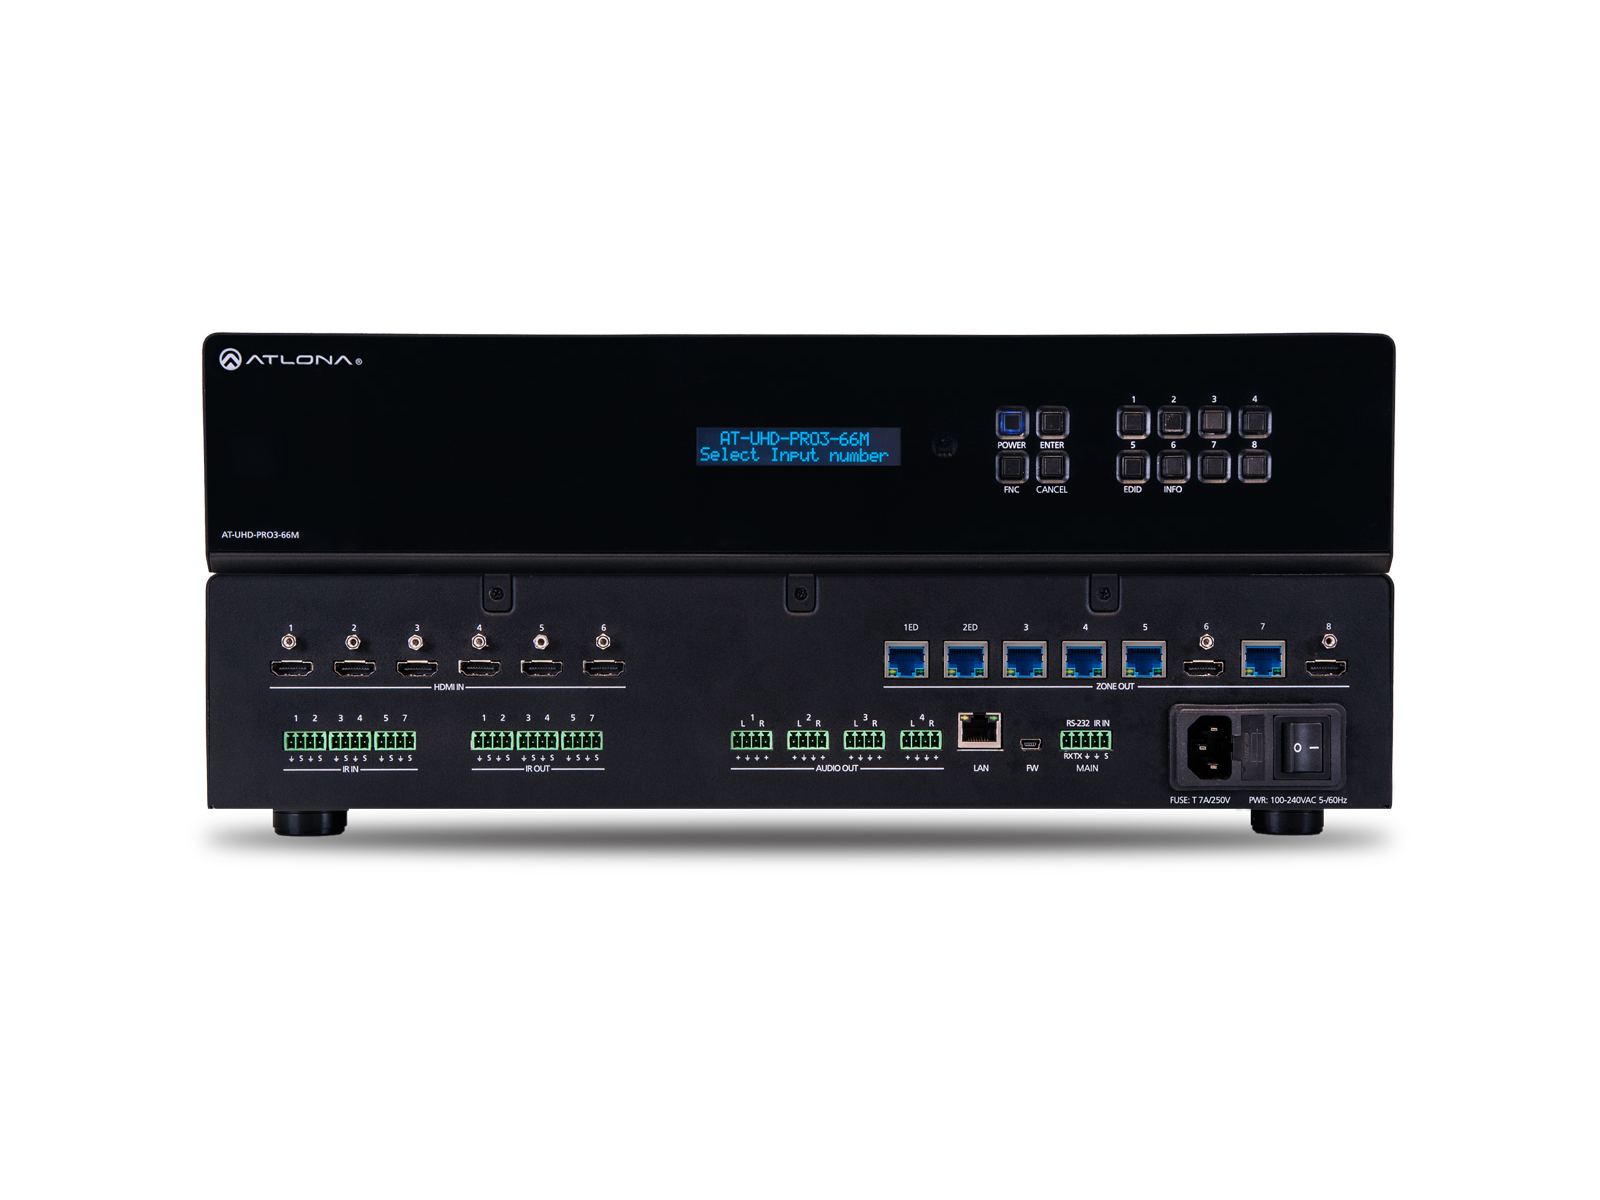 AT-UHD-PRO3-66M 4K/UHD Dual-Distance 6x6 HDMI to HDBaseT Matrix Switcher with PoE by Atlona